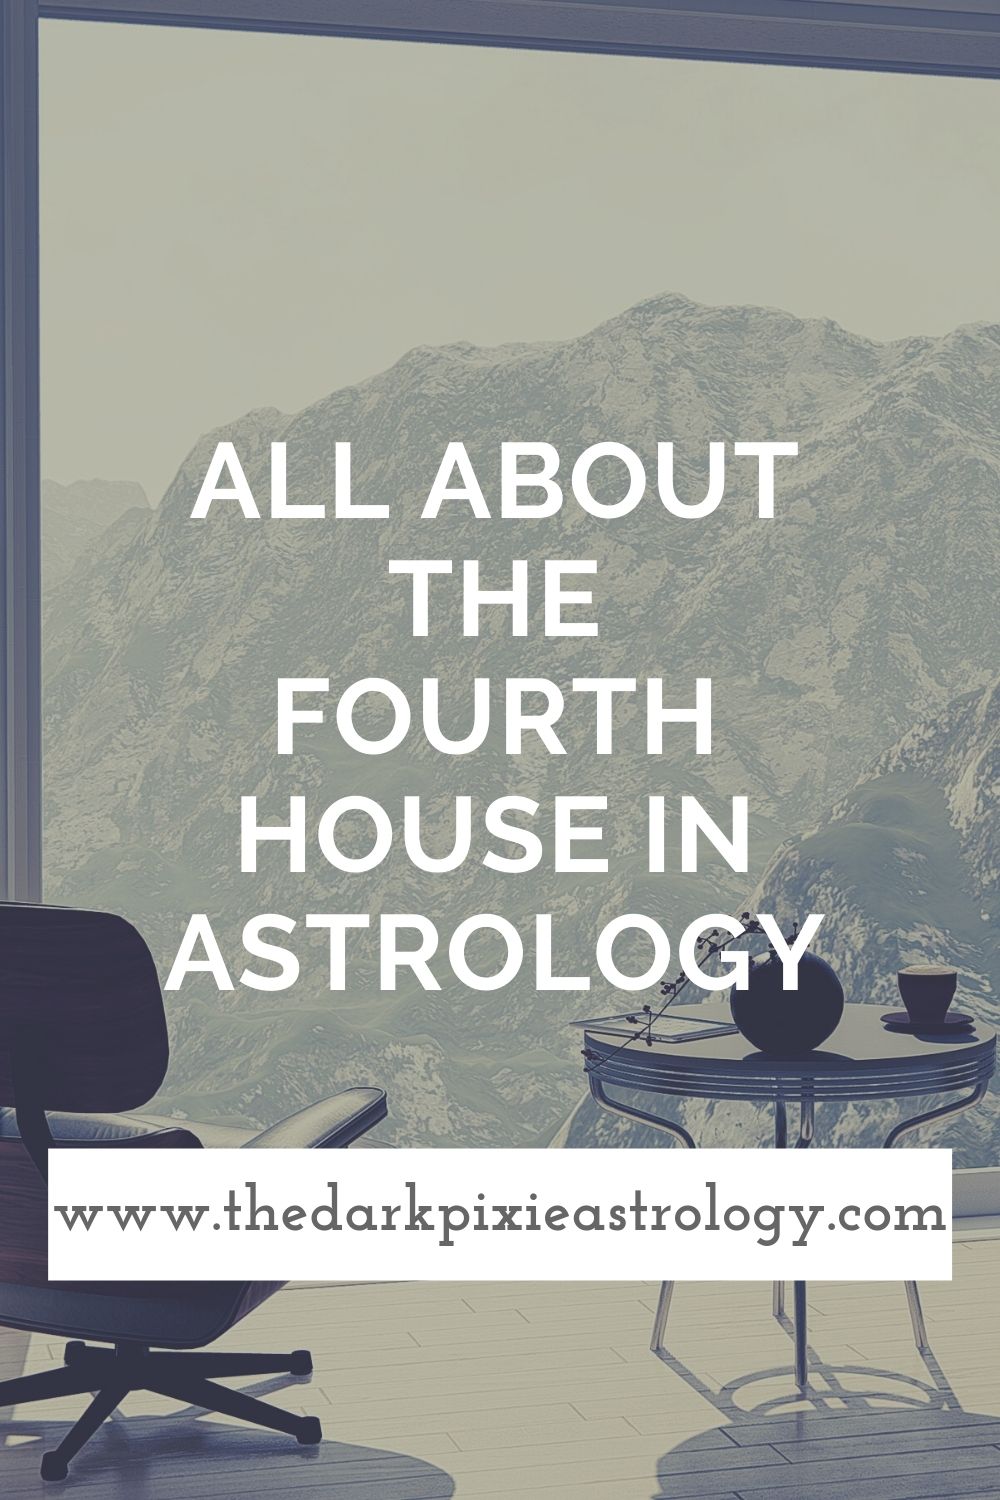 All About the Fourth House in Astrology - The Dark Pixie Astrology